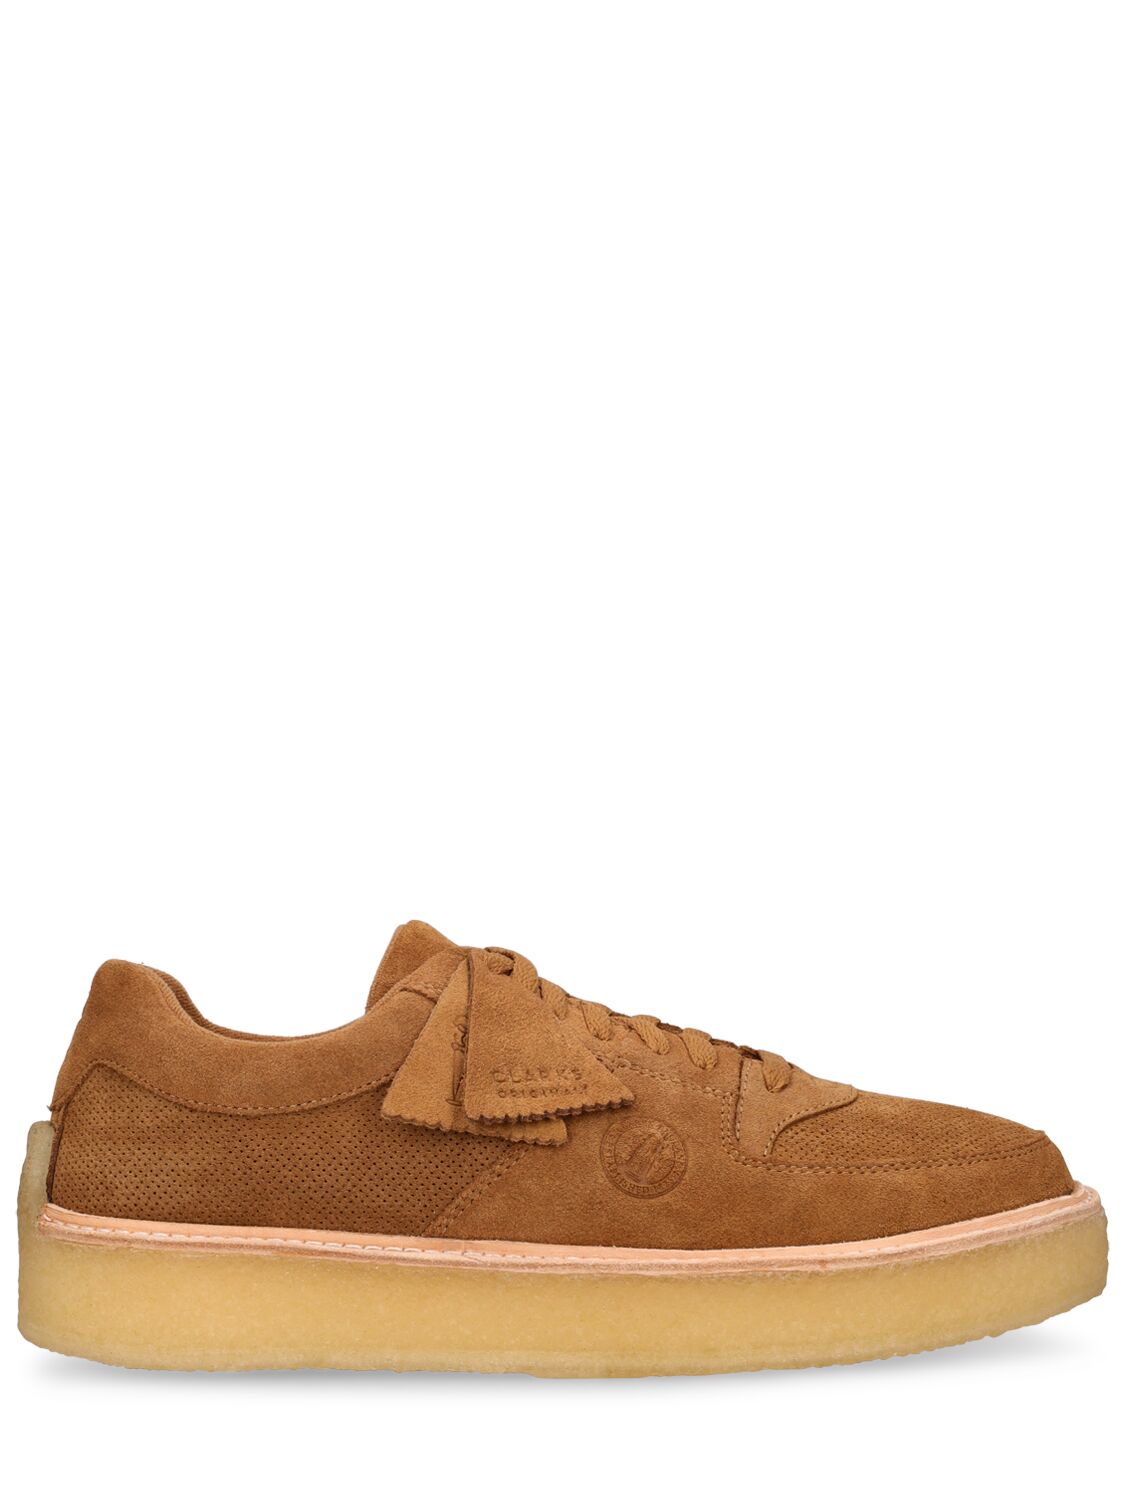 Sandford Suede Lace-up Shoes